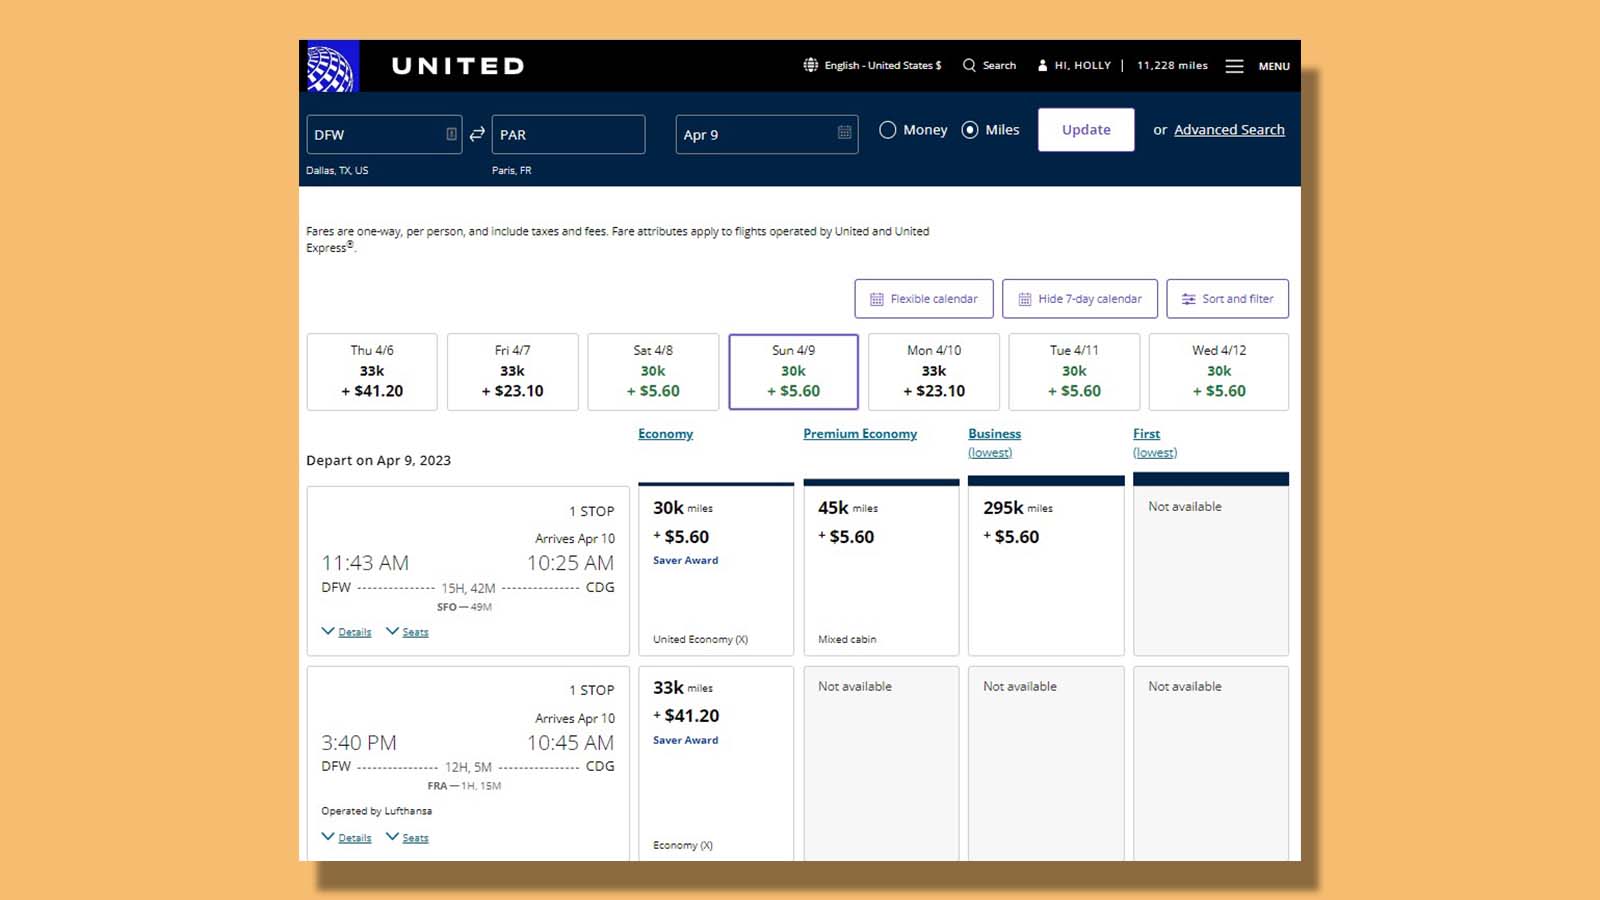 United offering Europe flights from 30,000 miles one-way - The Points Guy